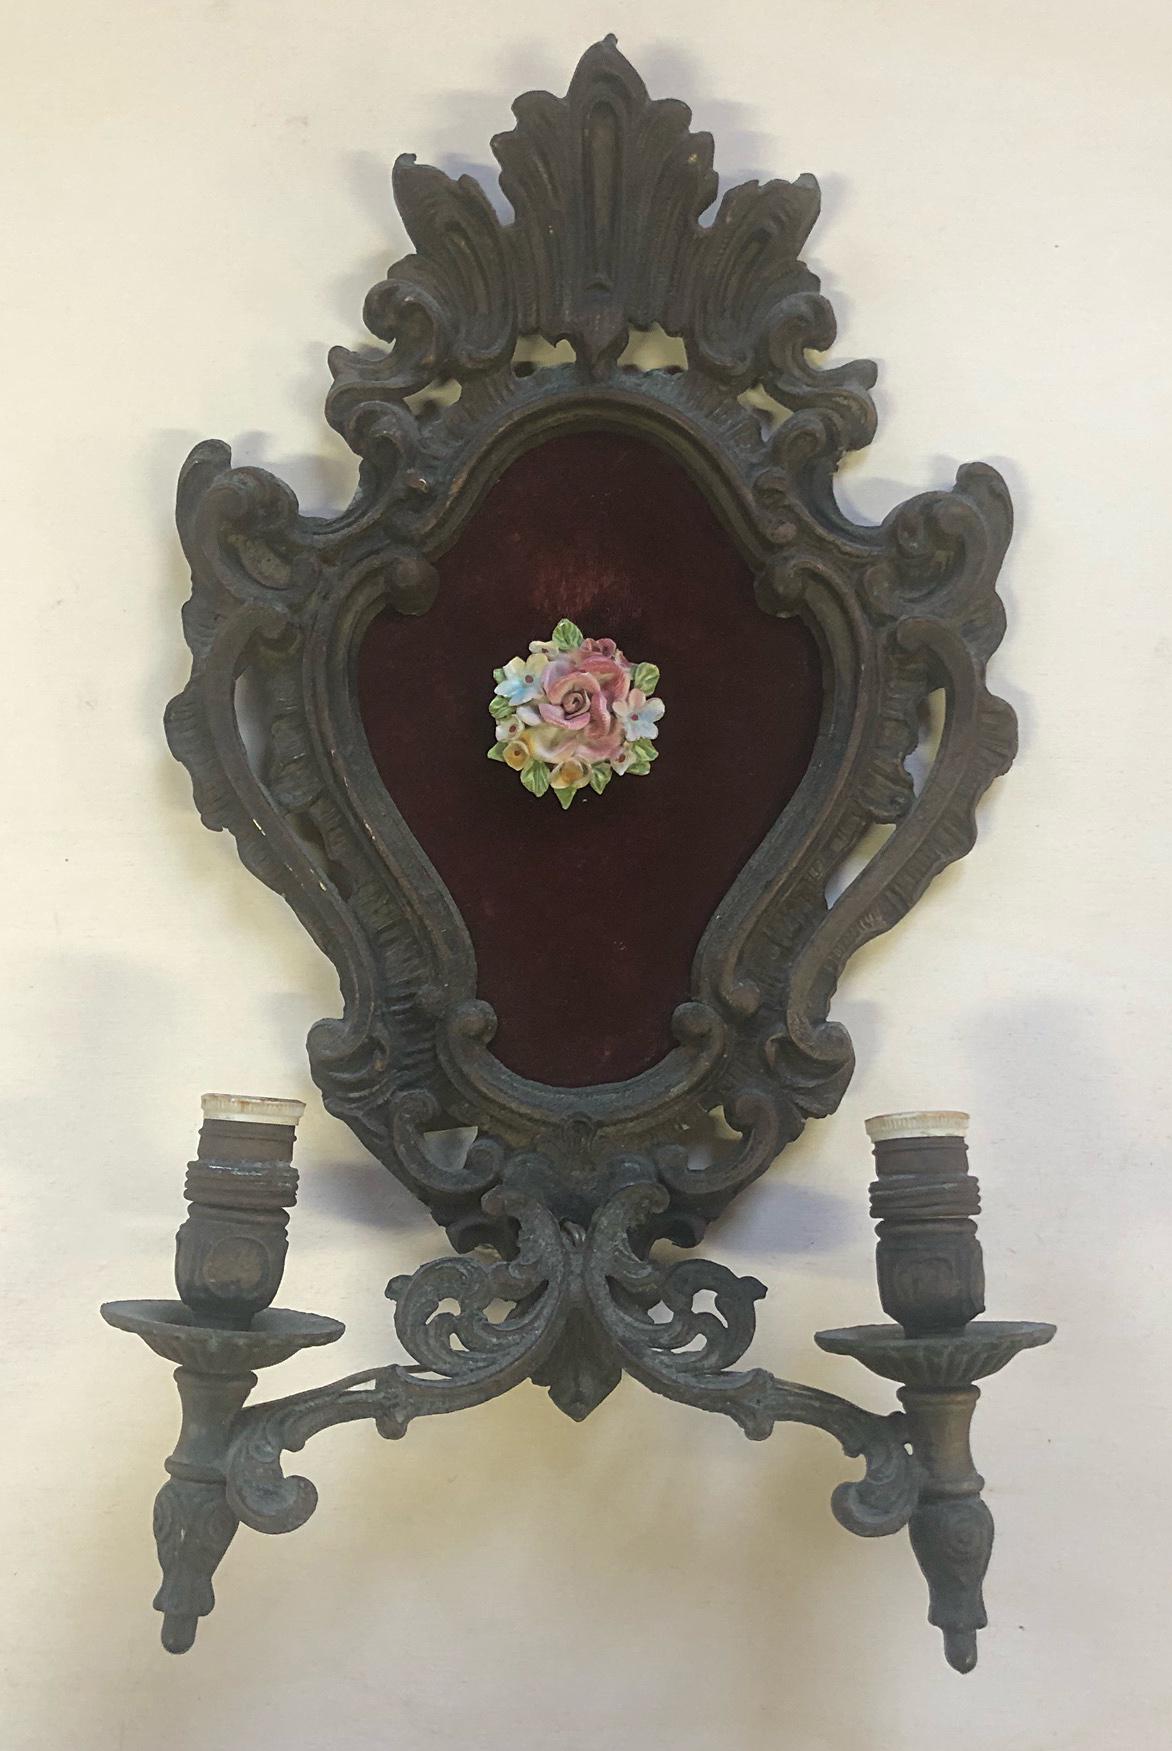 Two-light bronze wall light from the 19th century in Louis XVI style.
Given the weight and size, it will be delivered in a specific wooden case for export, packed in bubble wrap.
It comes from an old and important country house in Florence,